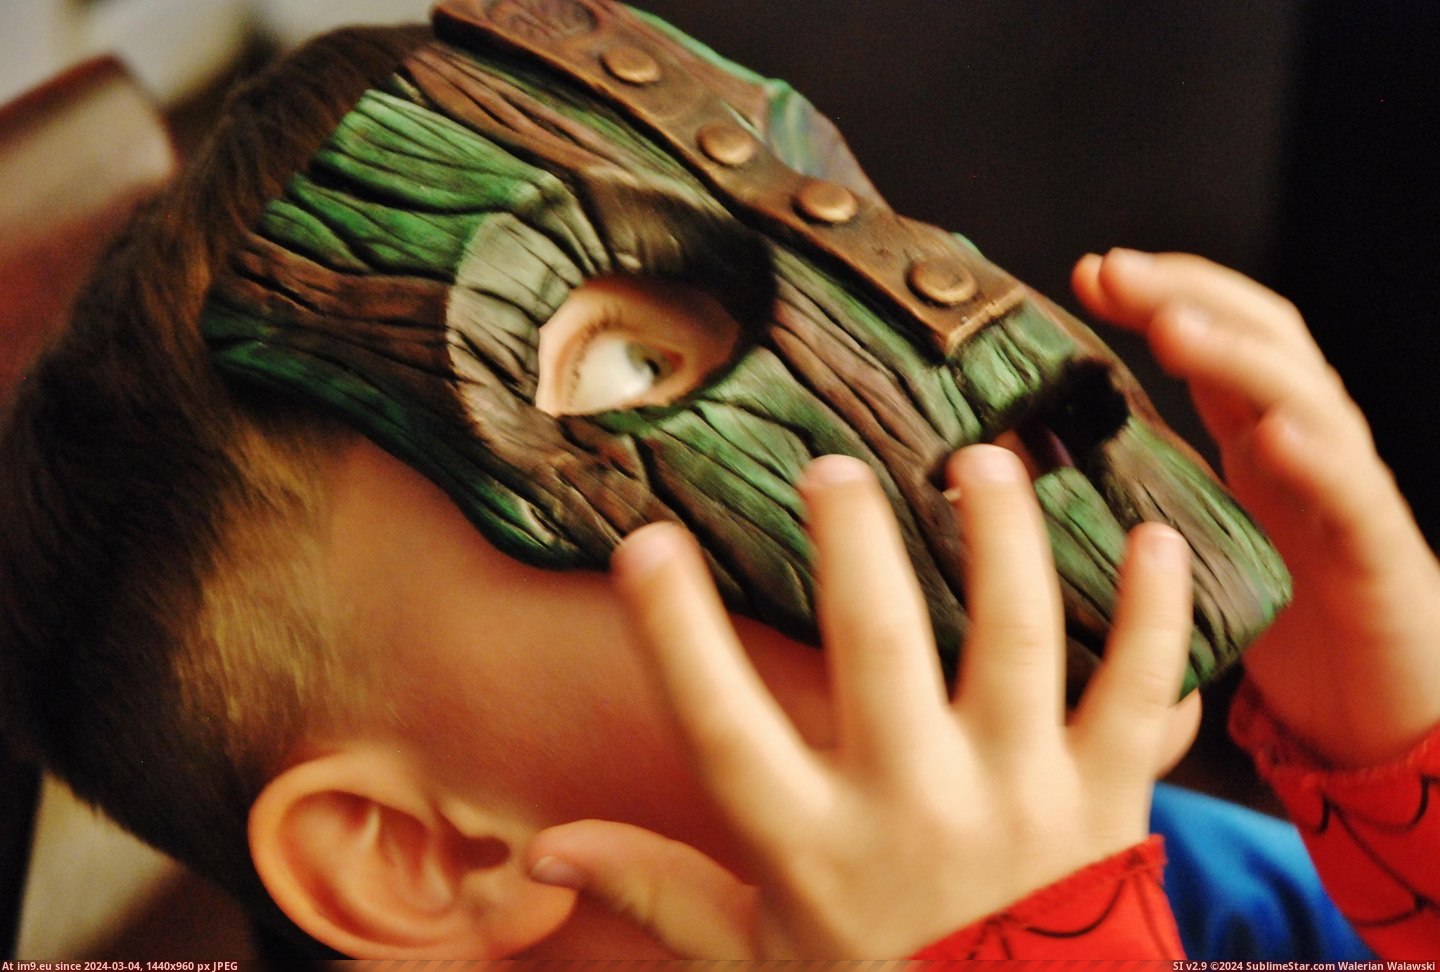 #Movie #Wanted #Stores #Superheroes #Manag #Son #Mask [Pics] My son wanted the mask from the movie the Mask, but it's all superheroes in stores these days so I made it for him. Manag Pic. (Image of album My r/PICS favs))